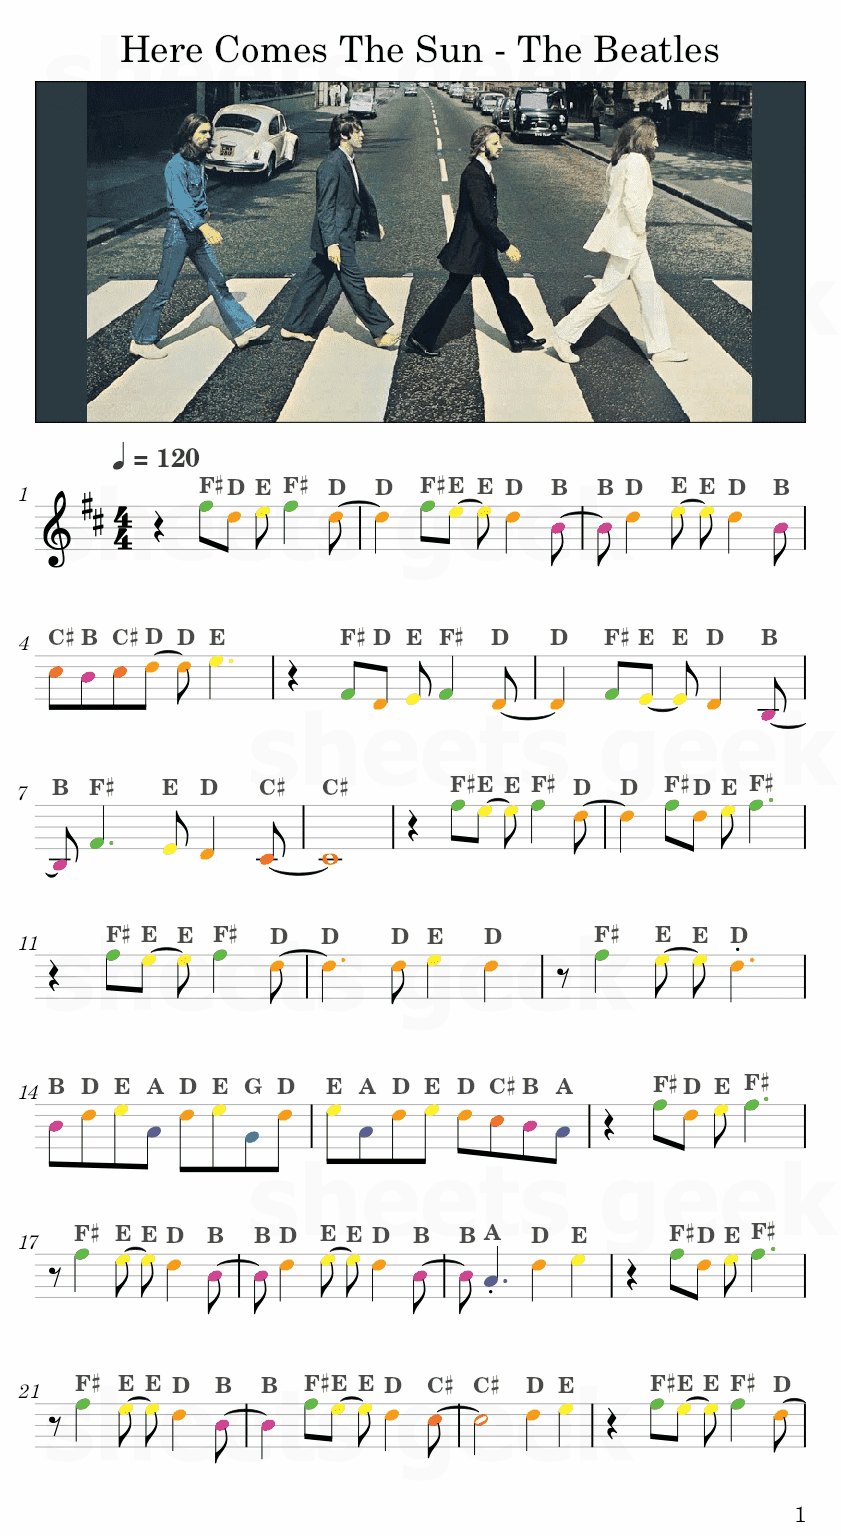 Here Comes The Sun - The Beatles Easy Sheet Music Free for piano, keyboard, flute, violin, sax, cello page 1